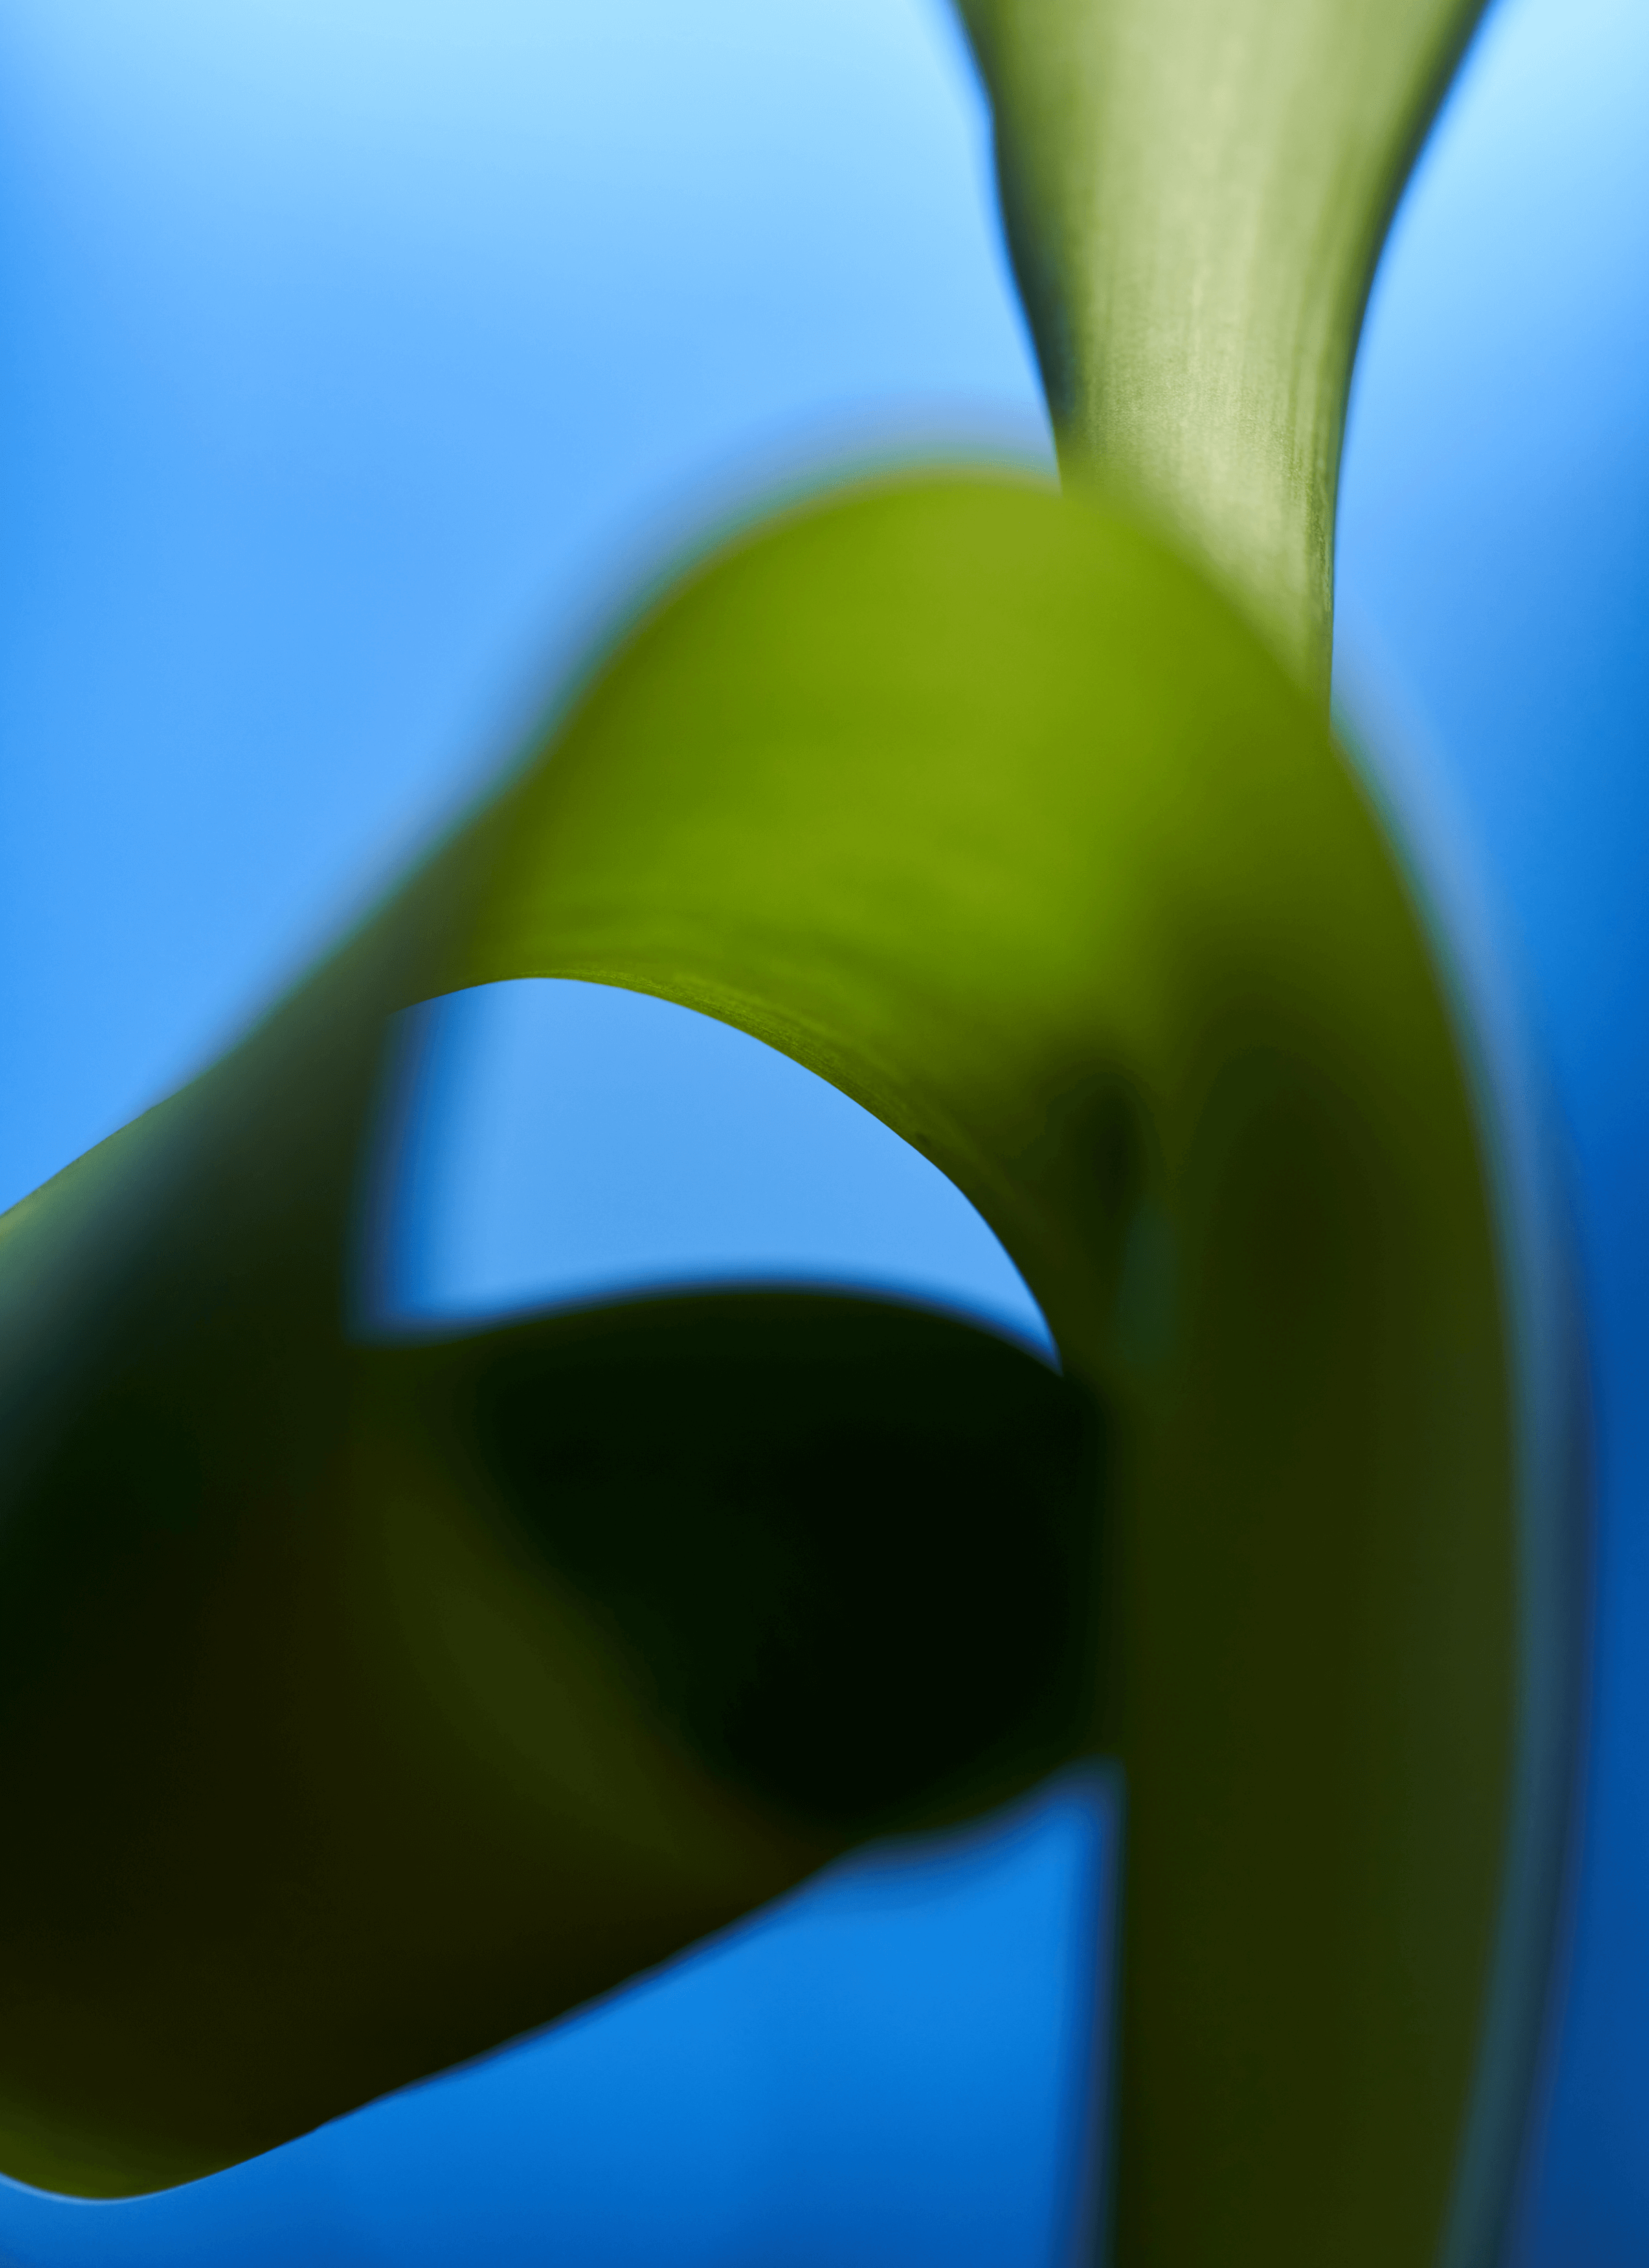 A closer-angle photoshoot of a plant.